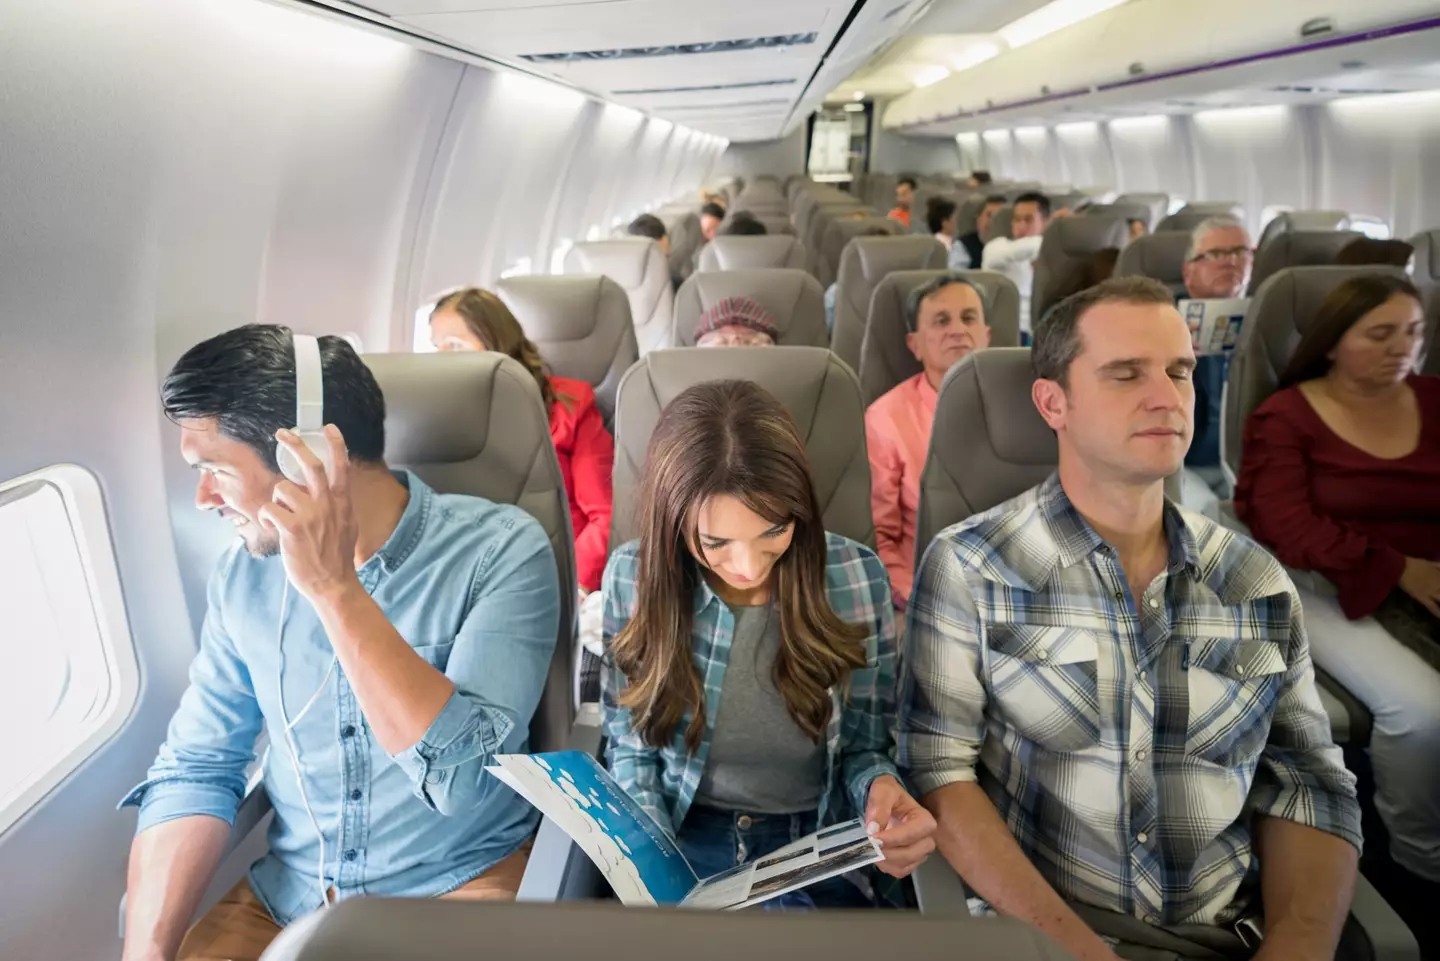 Assigned seating can be the source of much conflict on flights.